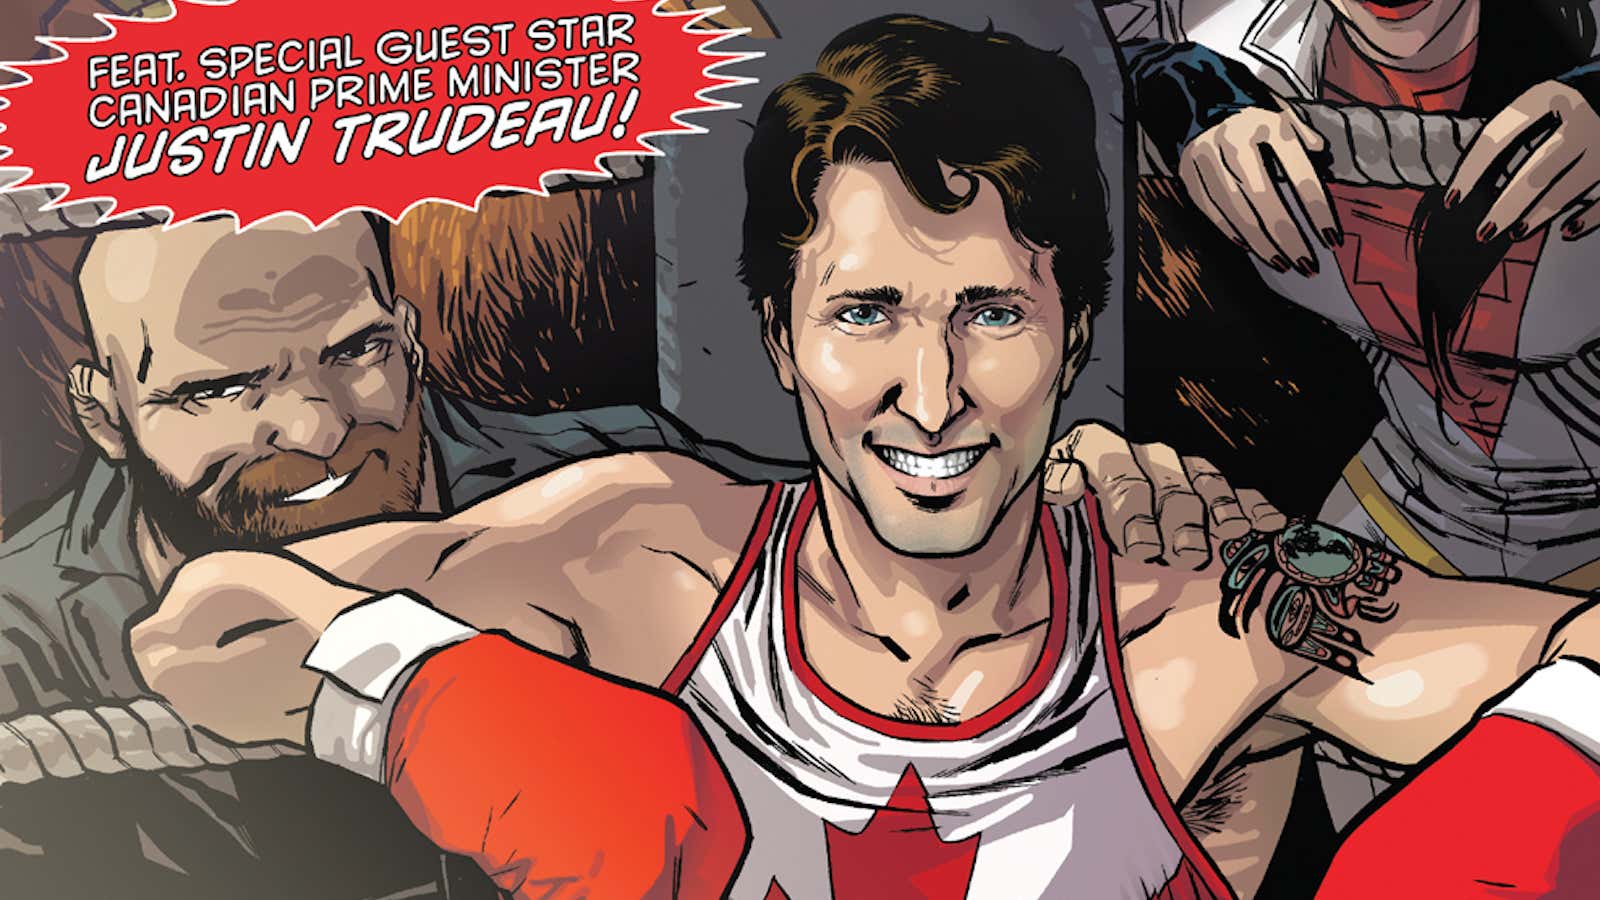 Prime Minister Justin Trudeau faces off against Tony Stark.